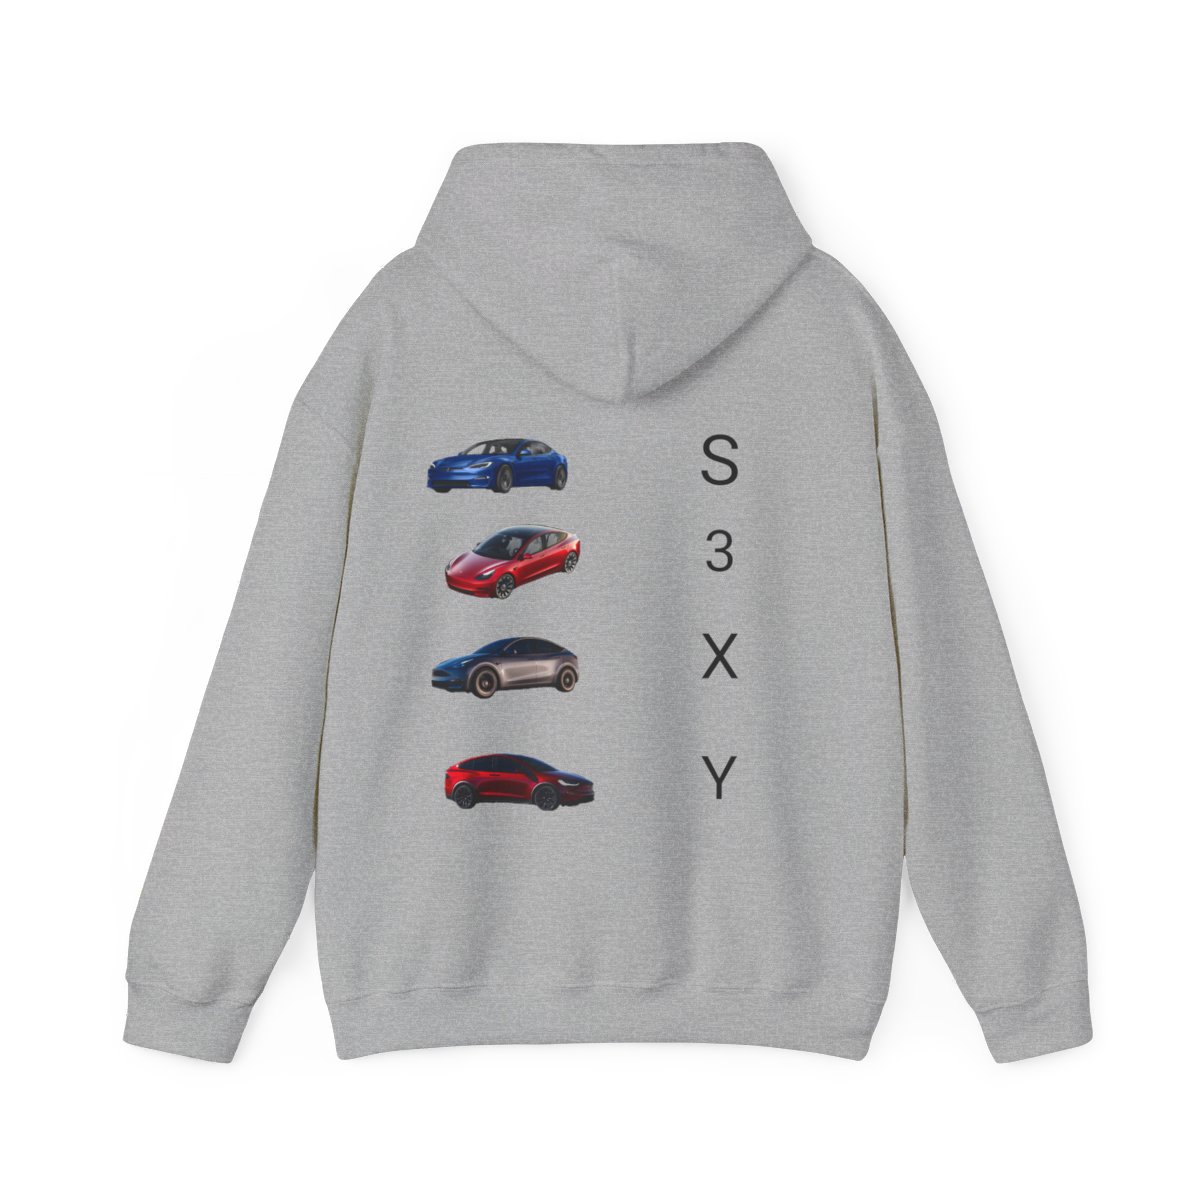 Teslaville S3XY hoodie product main image